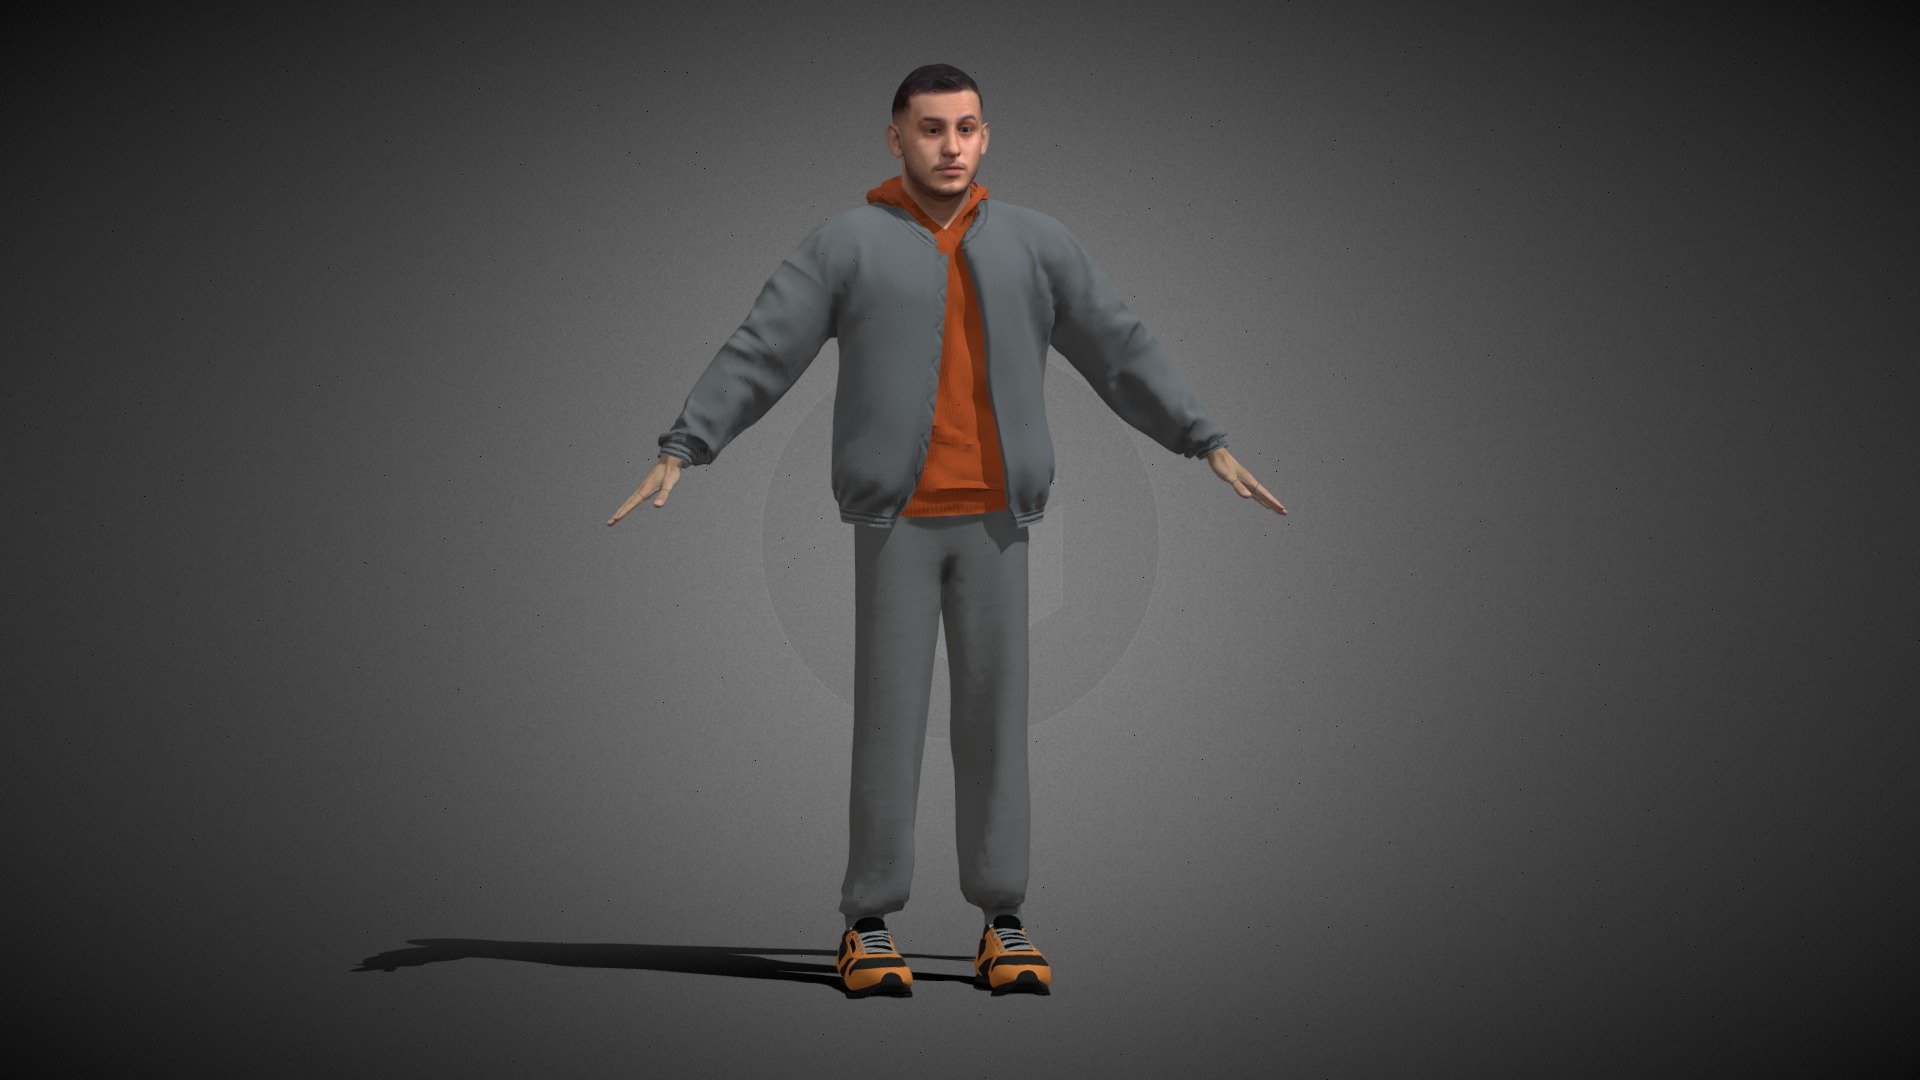 3D Model of SoSo Maness for our game Oktogone

I can create 3D models of all famous artists or custom characters.  You can send me a message on Instagram if you're interested &ndash;&gt; https://www.instagram.com/valone.future/ - Soso Maness - 3D model by ValOne 3d model